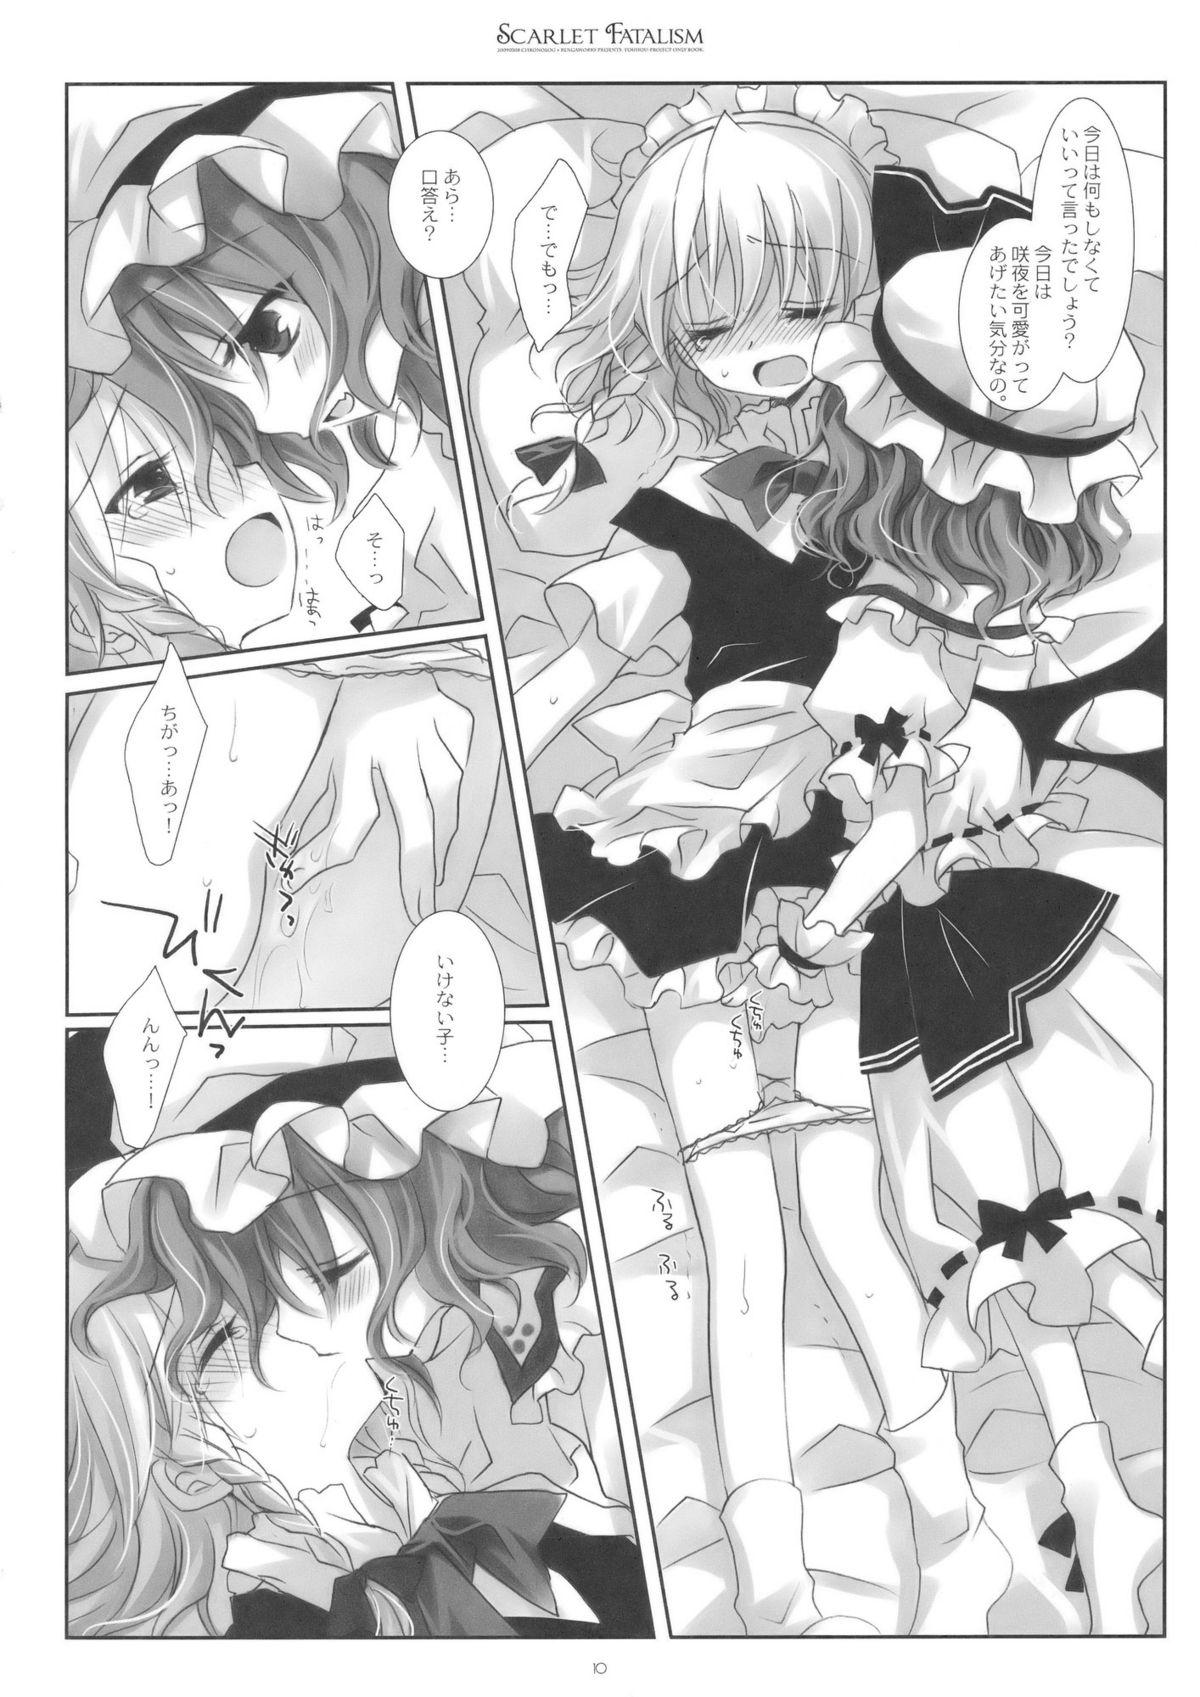 Indonesian Scarlet Fatalism - Touhou project Ass Sex - Page 10